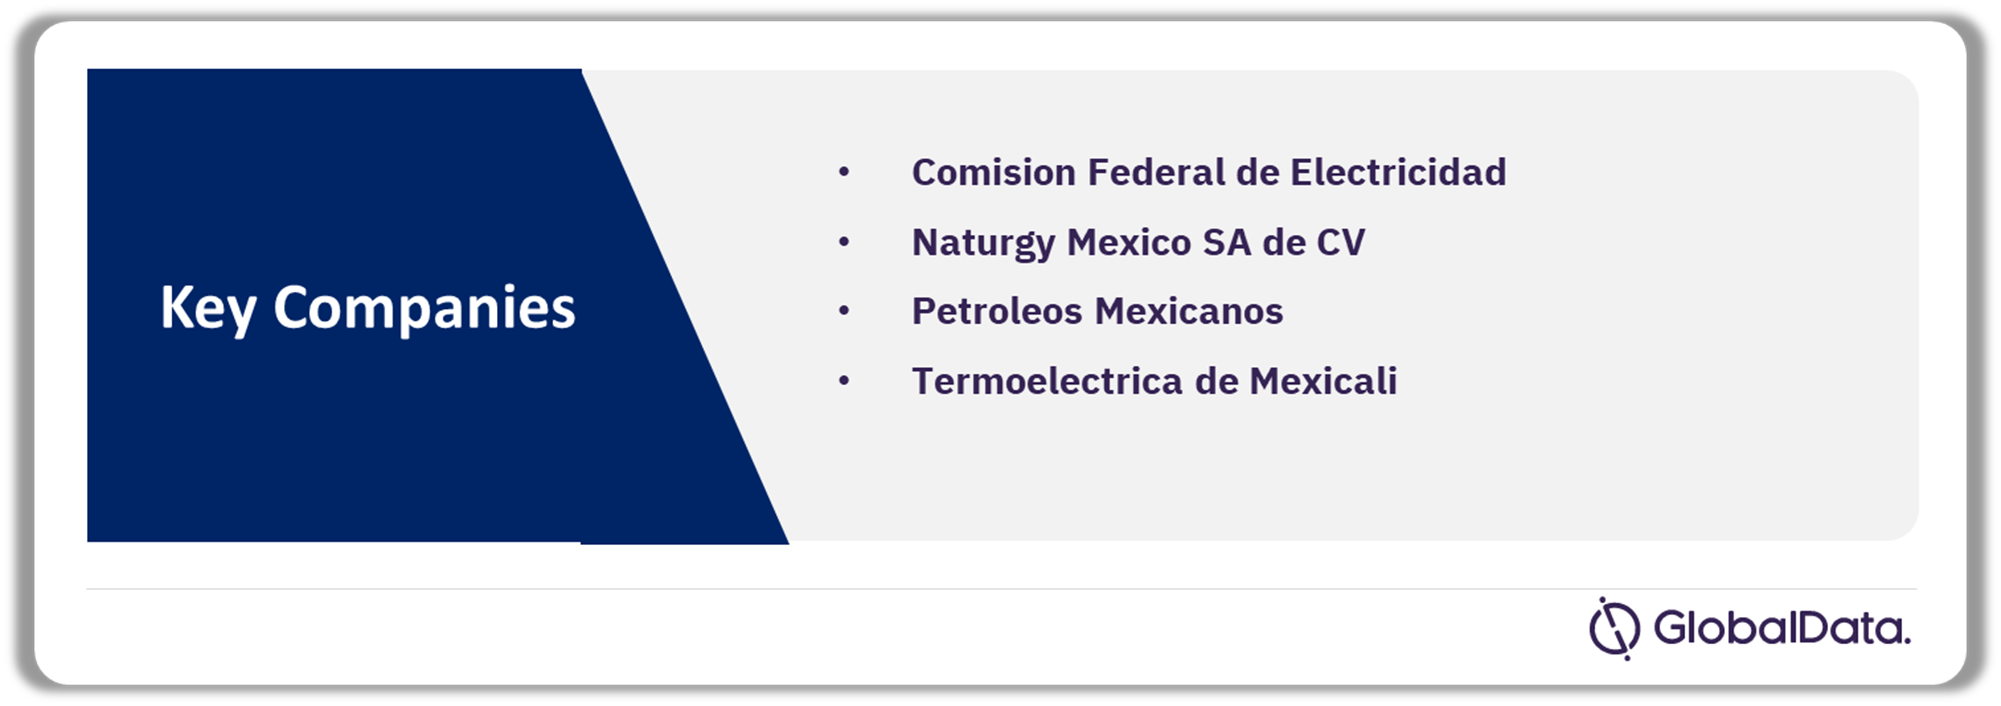 Mexico Thermal Power Market Analysis by Companies